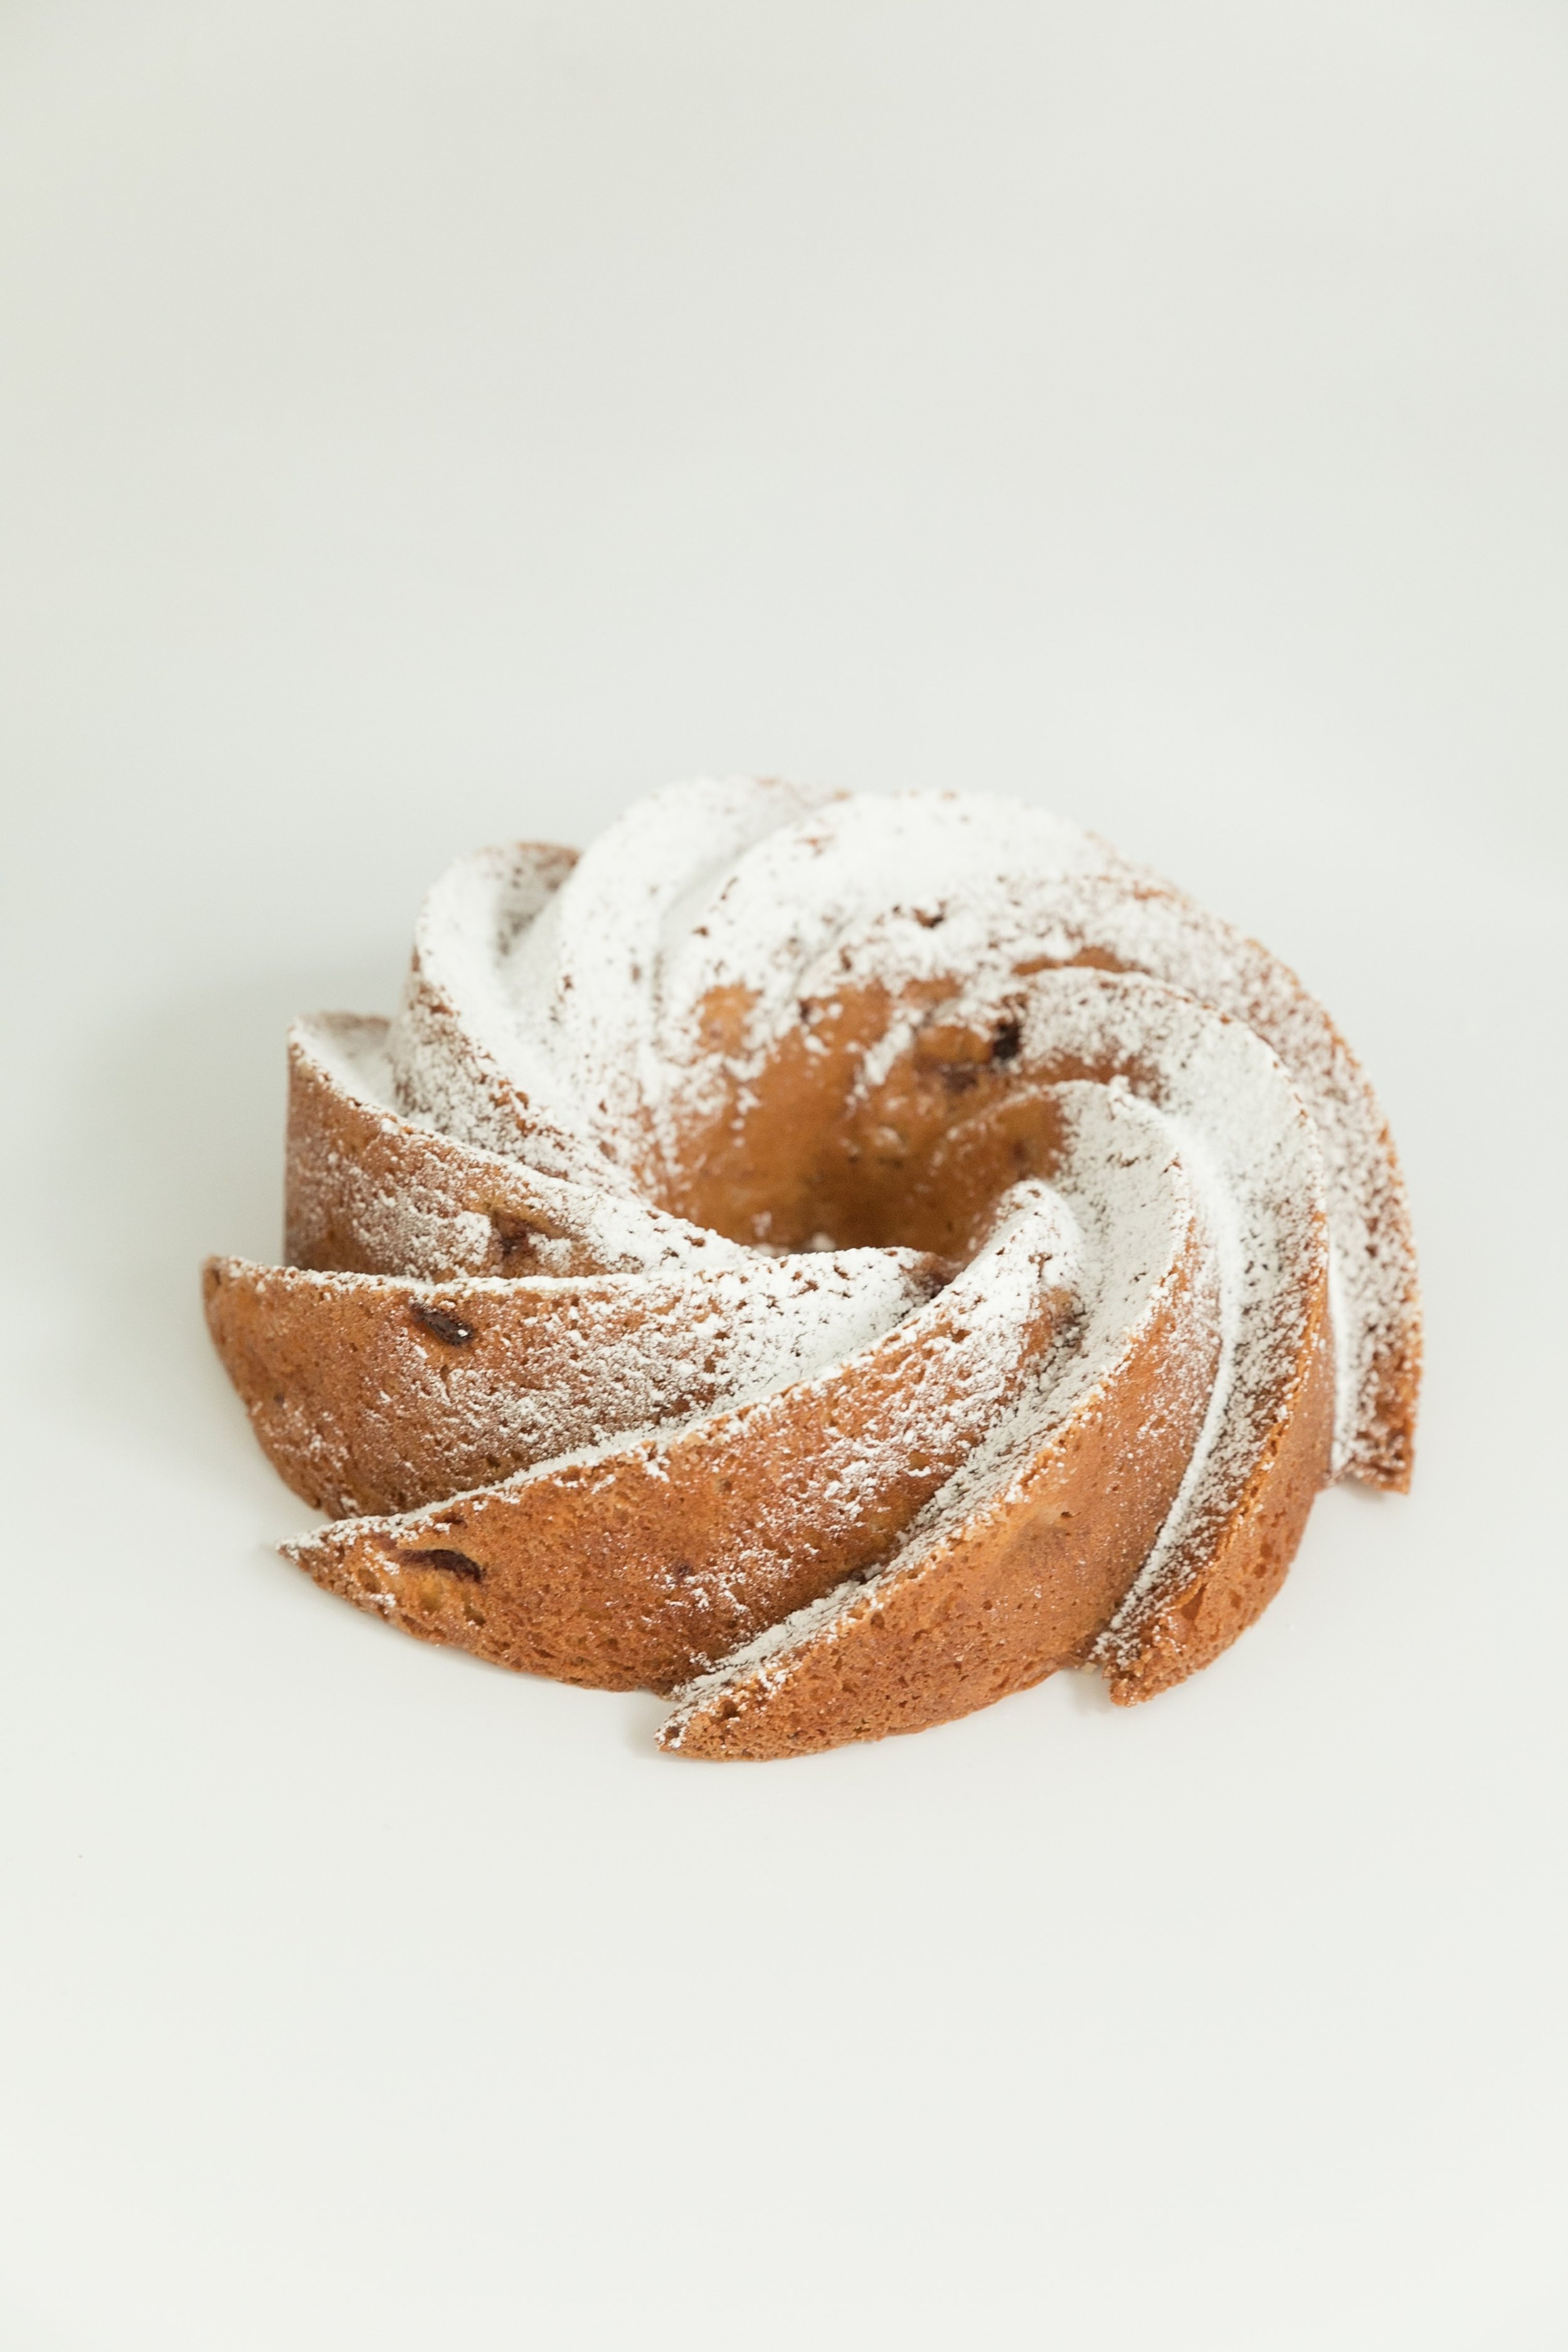  strawberry bundt cake topped with a light dusting of powdered sugar 